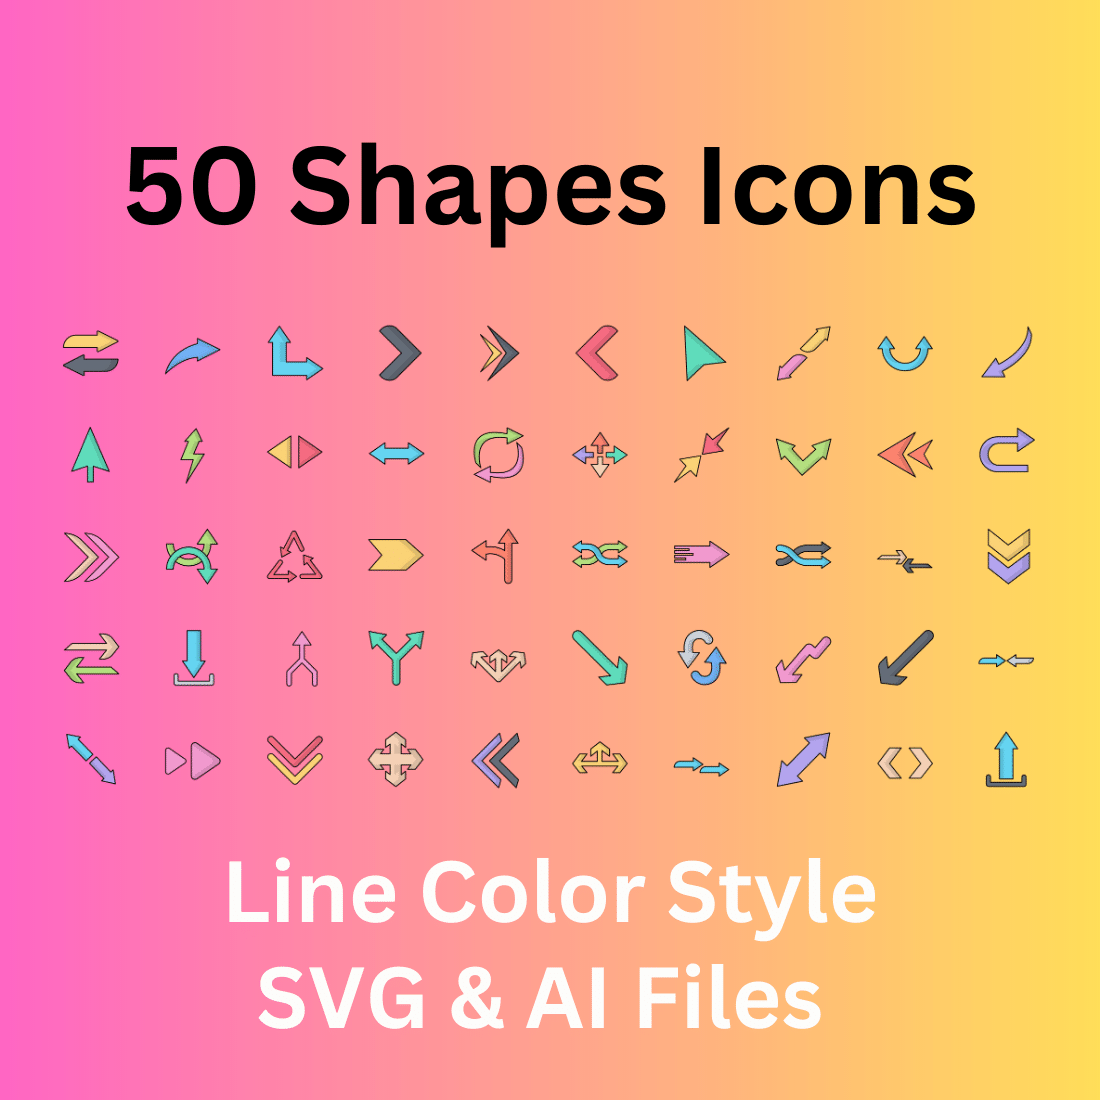 Shapes Icon Set 50 Line Color Icons - SVG And AI Files cover image.